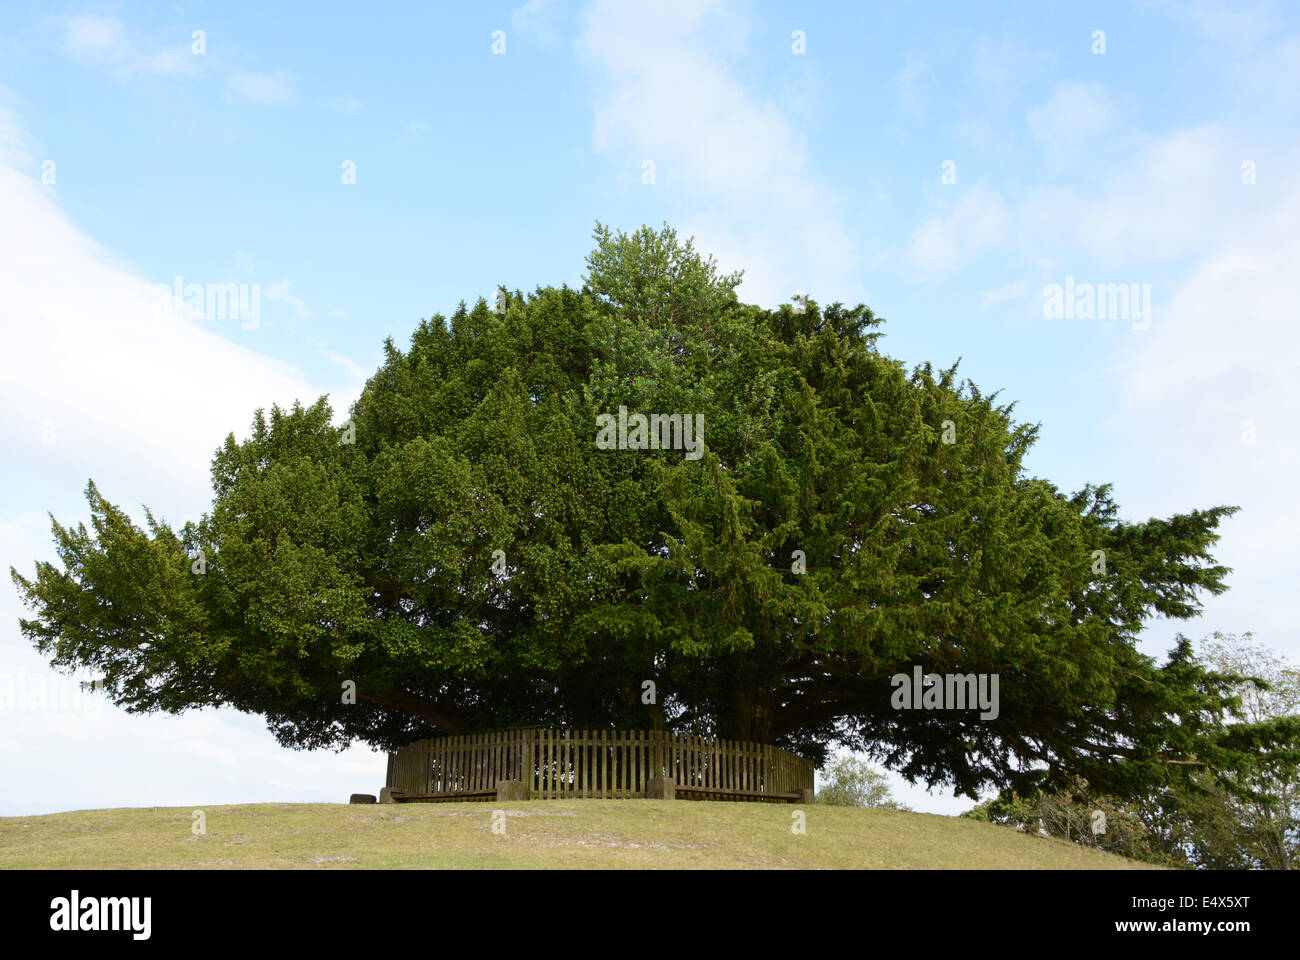 Large yew tree on Bolton's Bench hillock in Lyndhurst in the New Forest, Hampshire, England Stock Photo